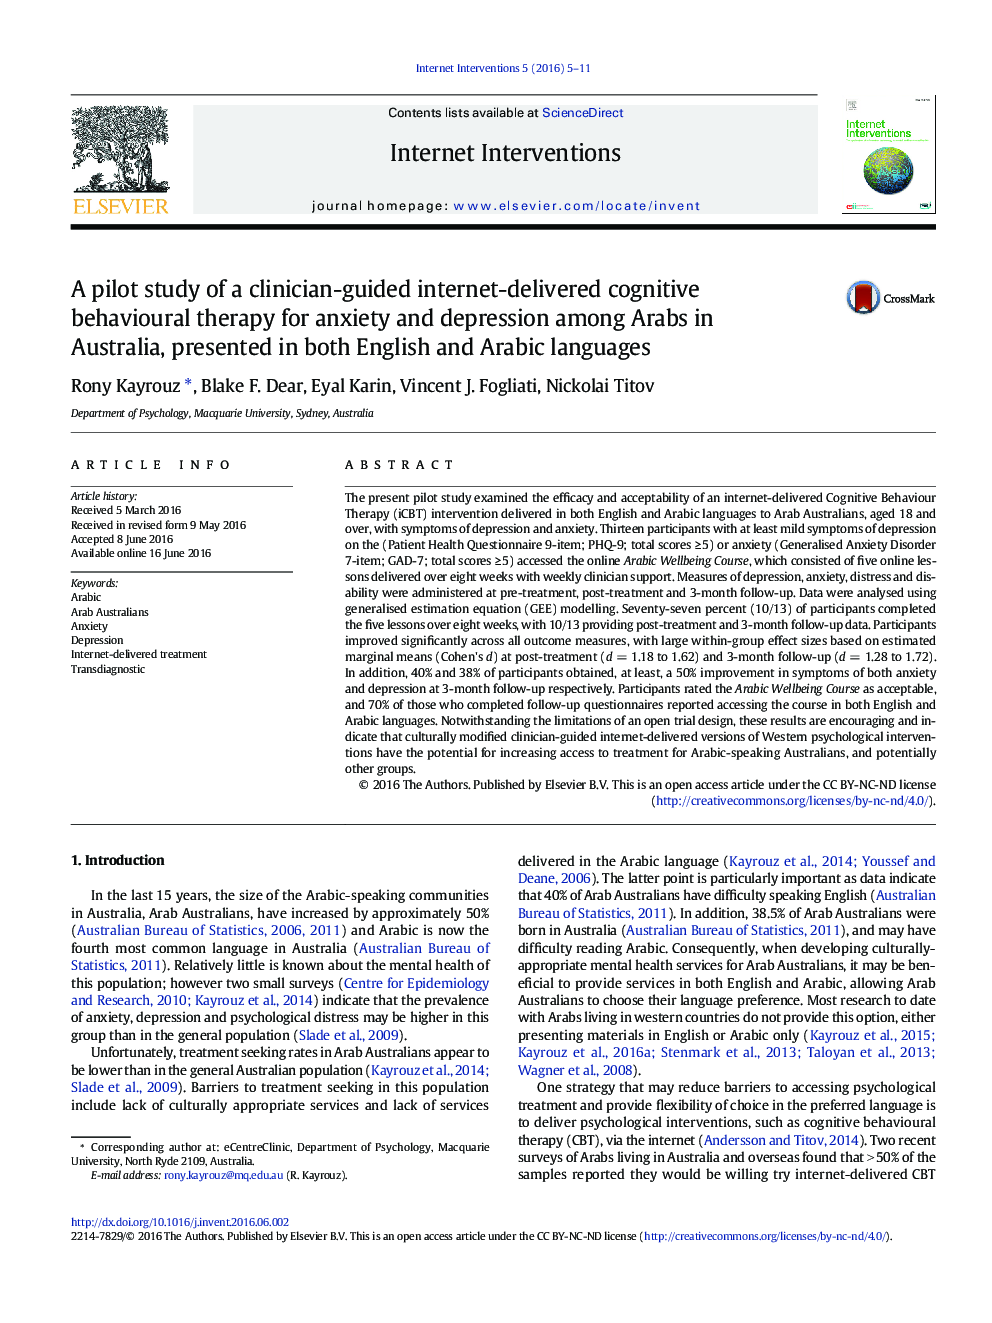 A pilot study of a clinician-guided internet-delivered cognitive behavioural therapy for anxiety and depression among Arabs in Australia, presented in both English and Arabic languages